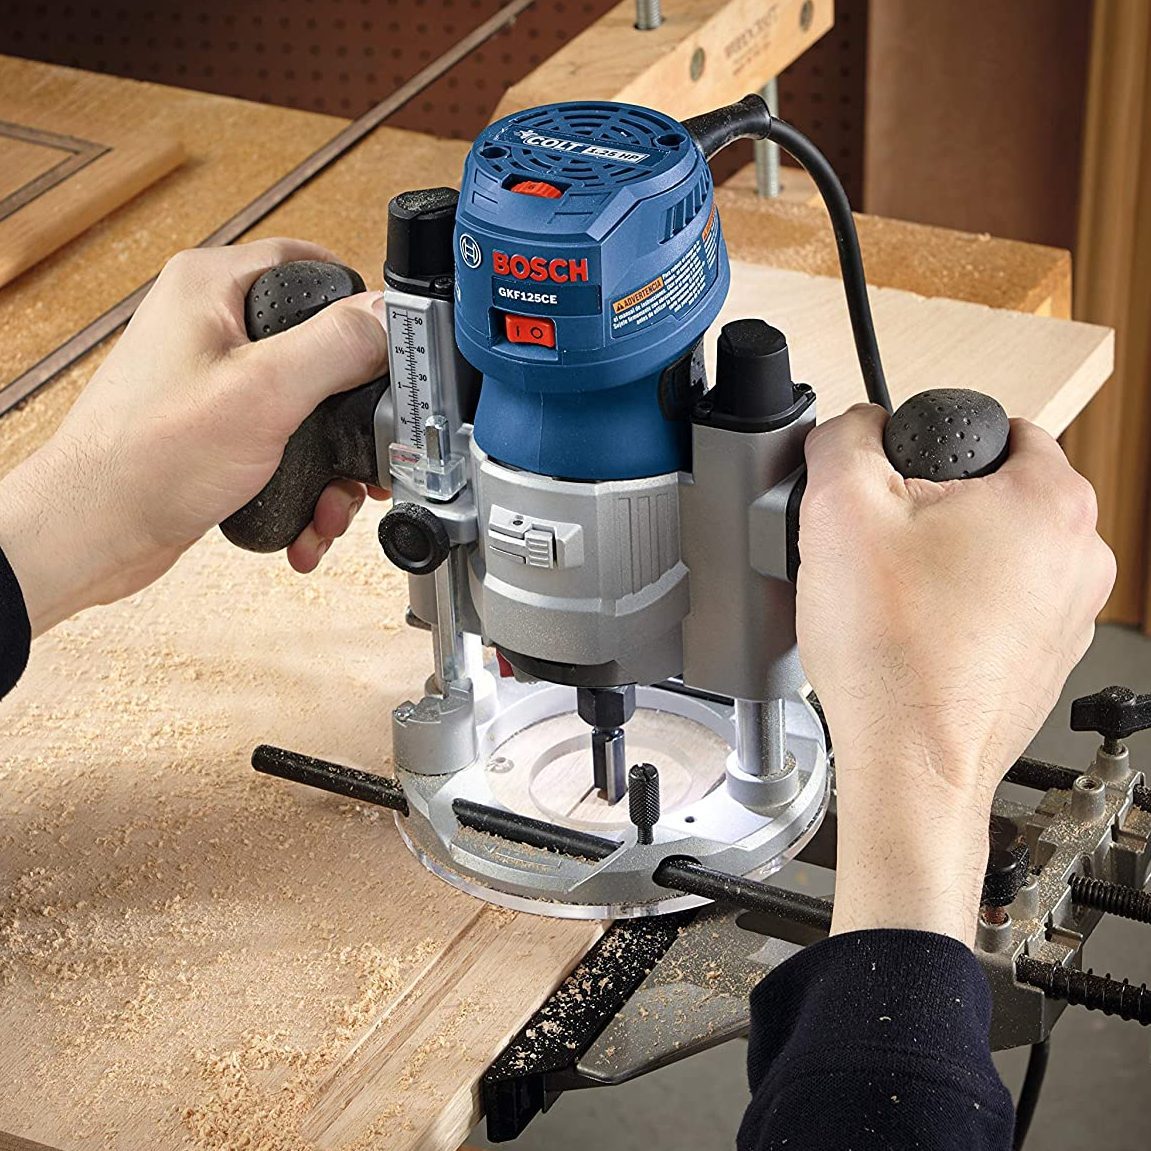 Beginner's Guide on How to Use a Table Saw - Toolstop